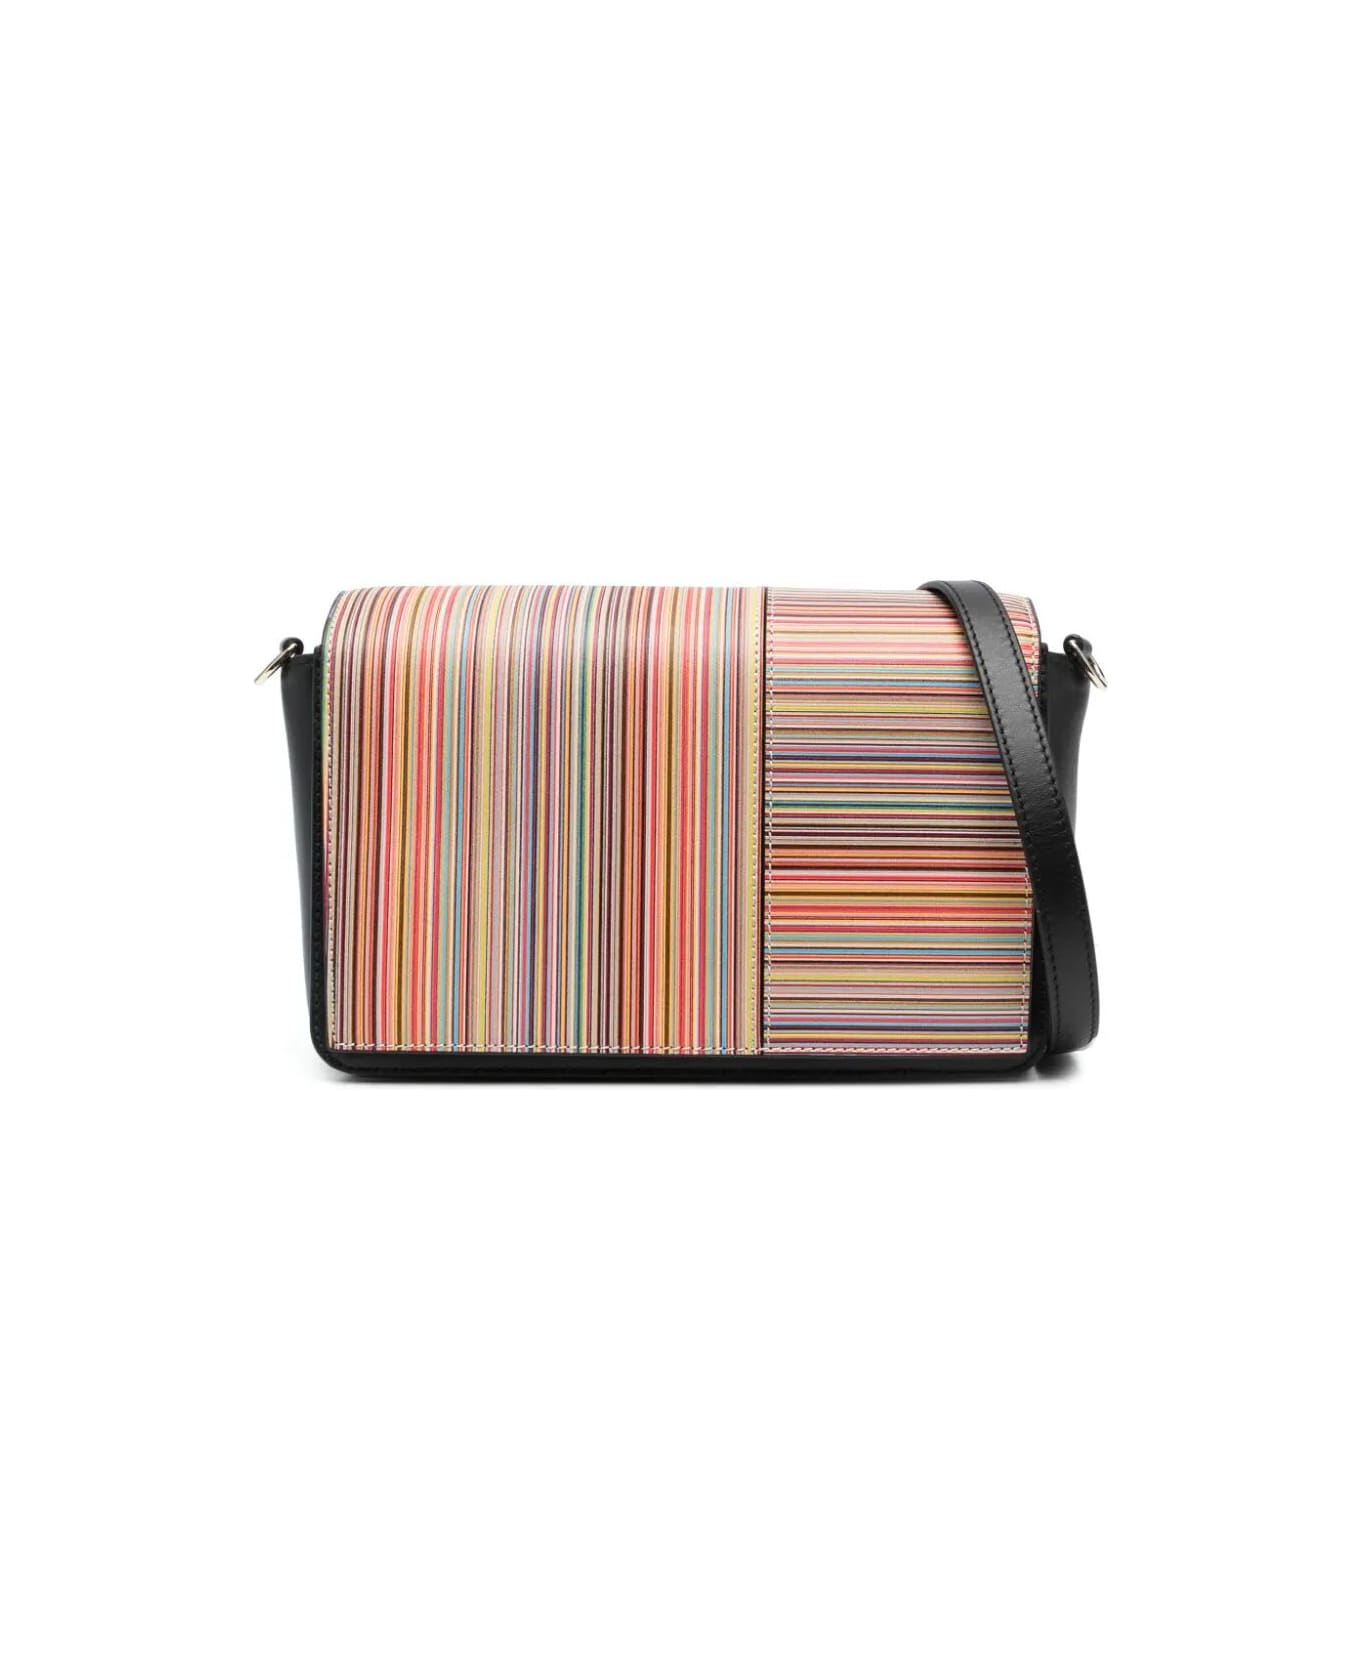 PS by Paul Smith Bag Flap Xbody - Multi